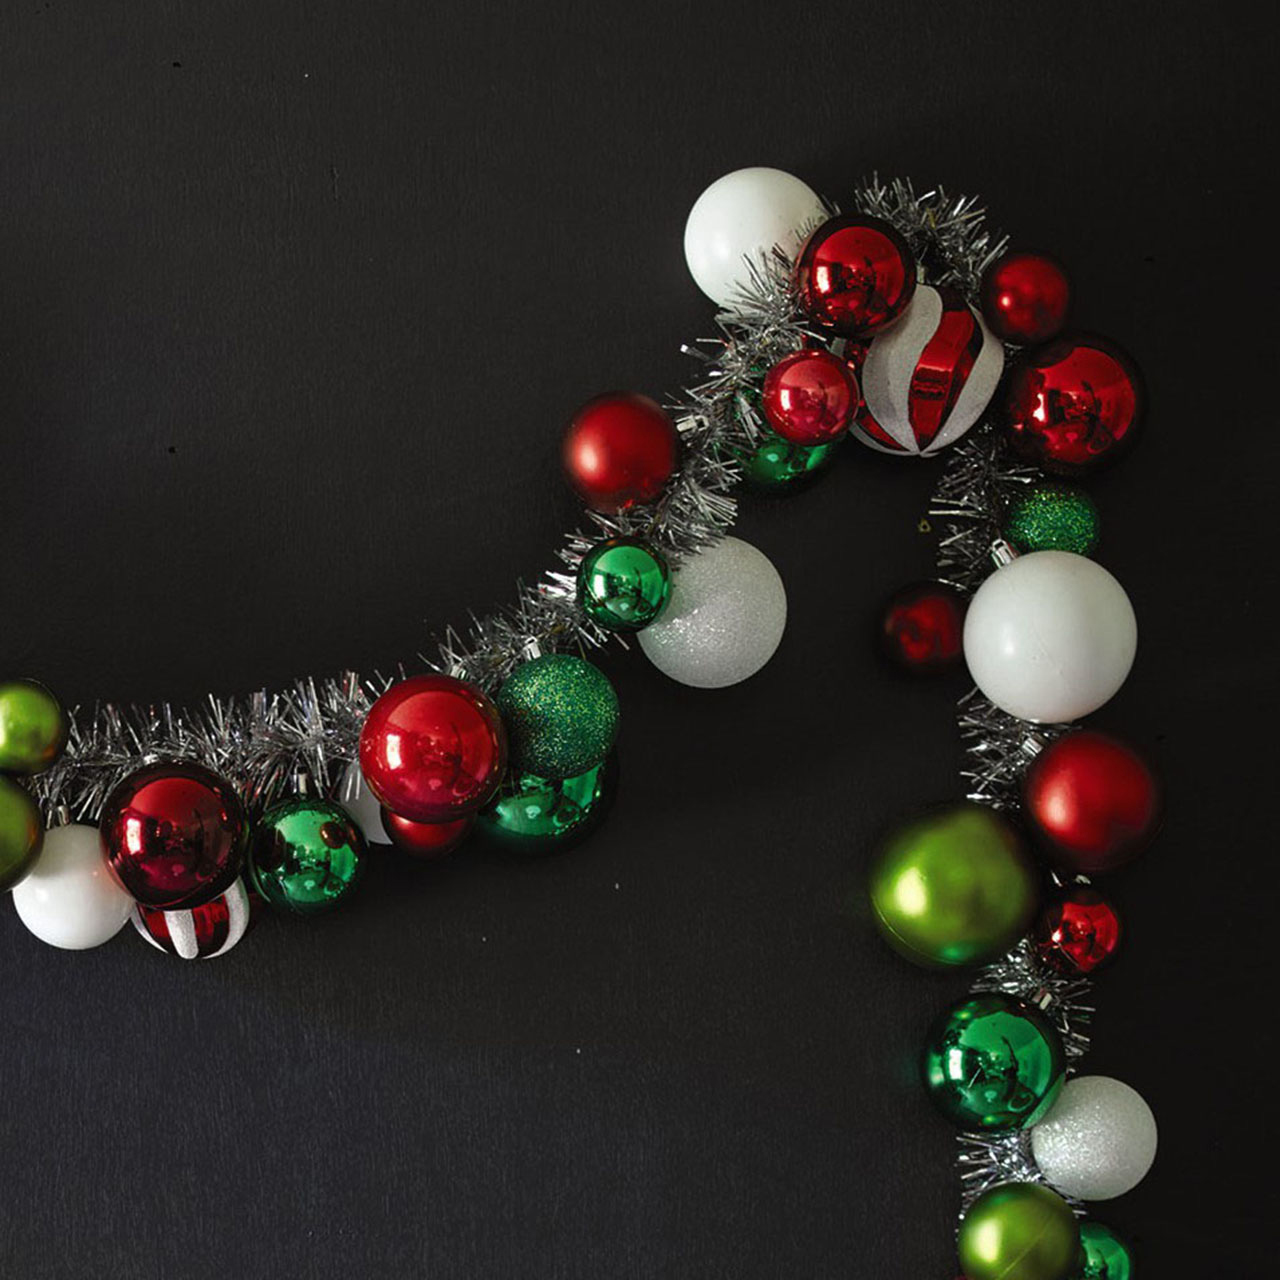 Coloured Bauble Garland